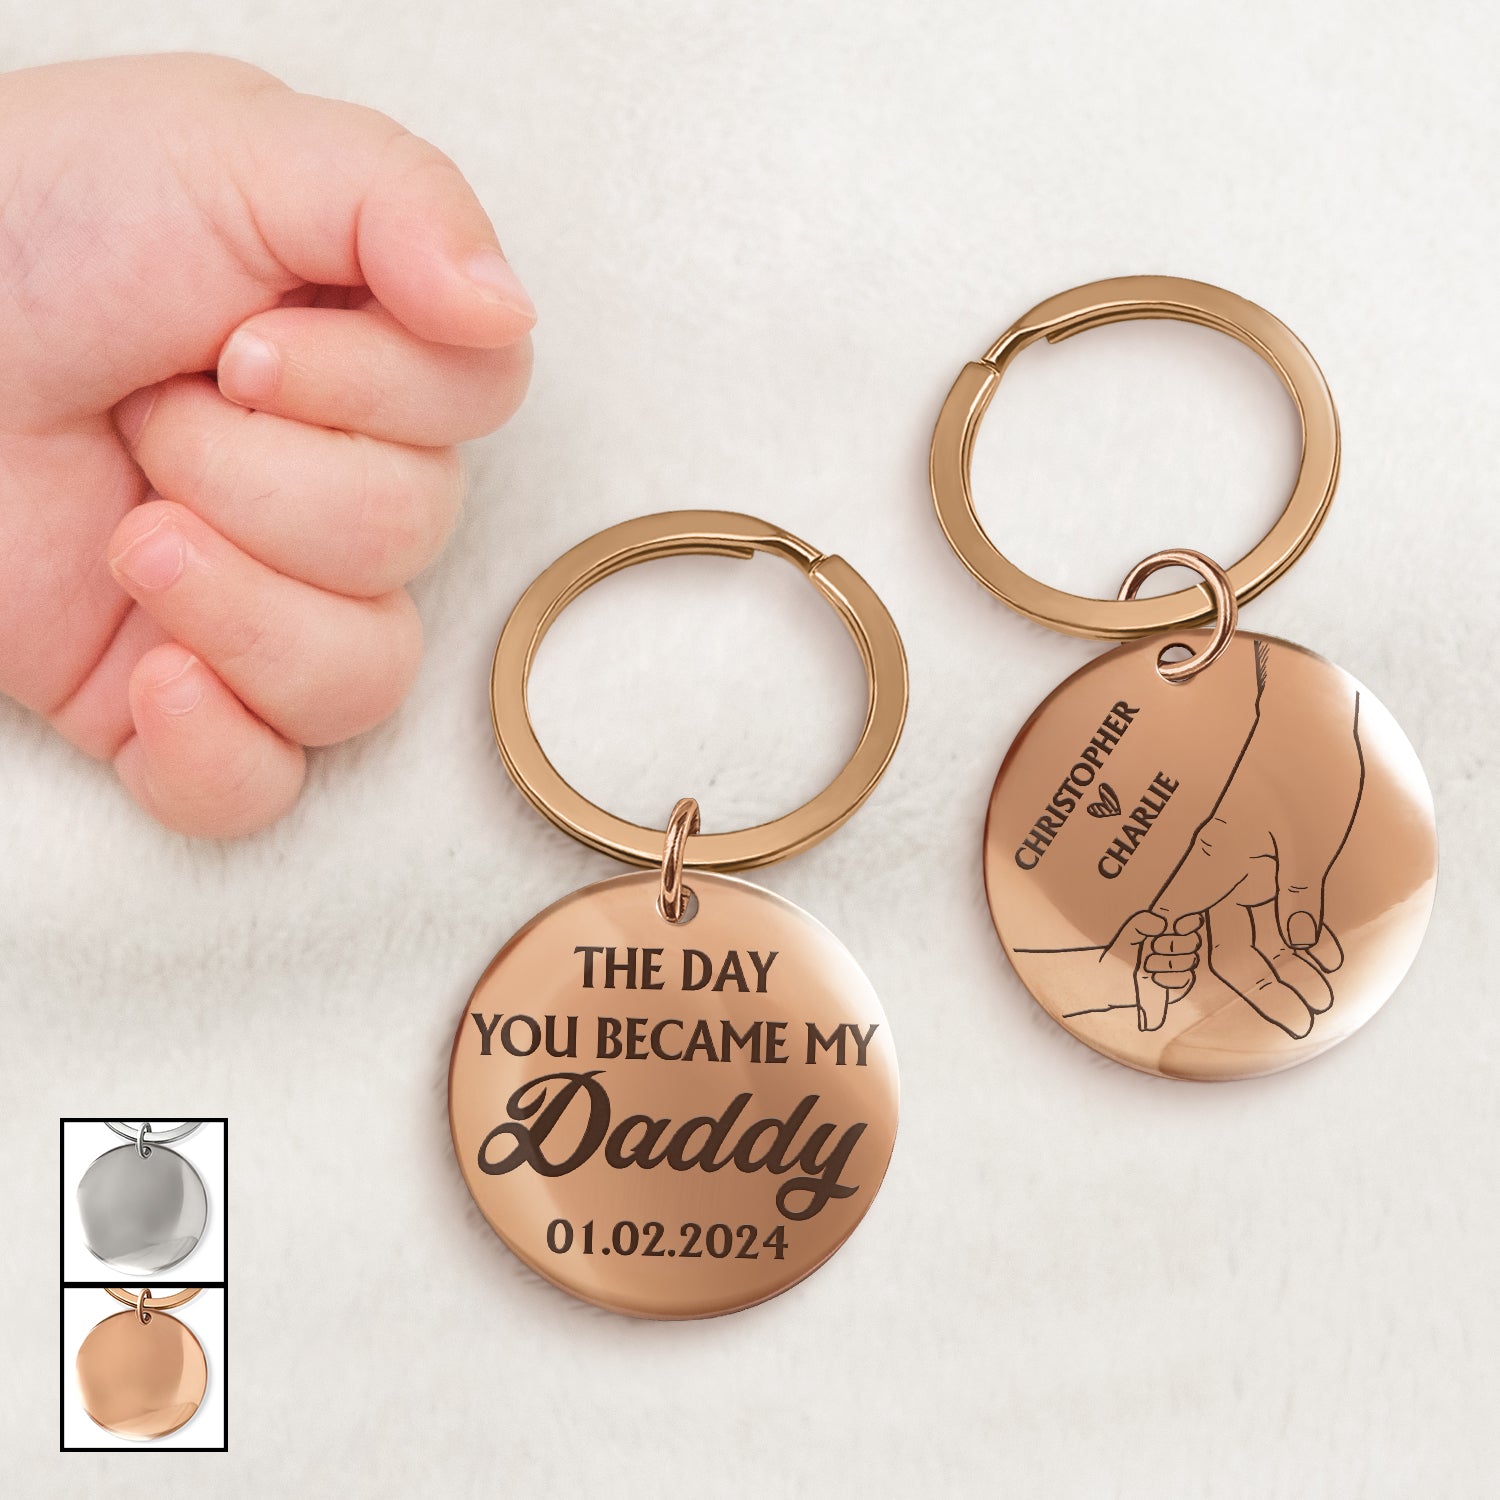 The Day You Became My Daddy - Gift For Dad, Father, New Dad - Personalized Keyring